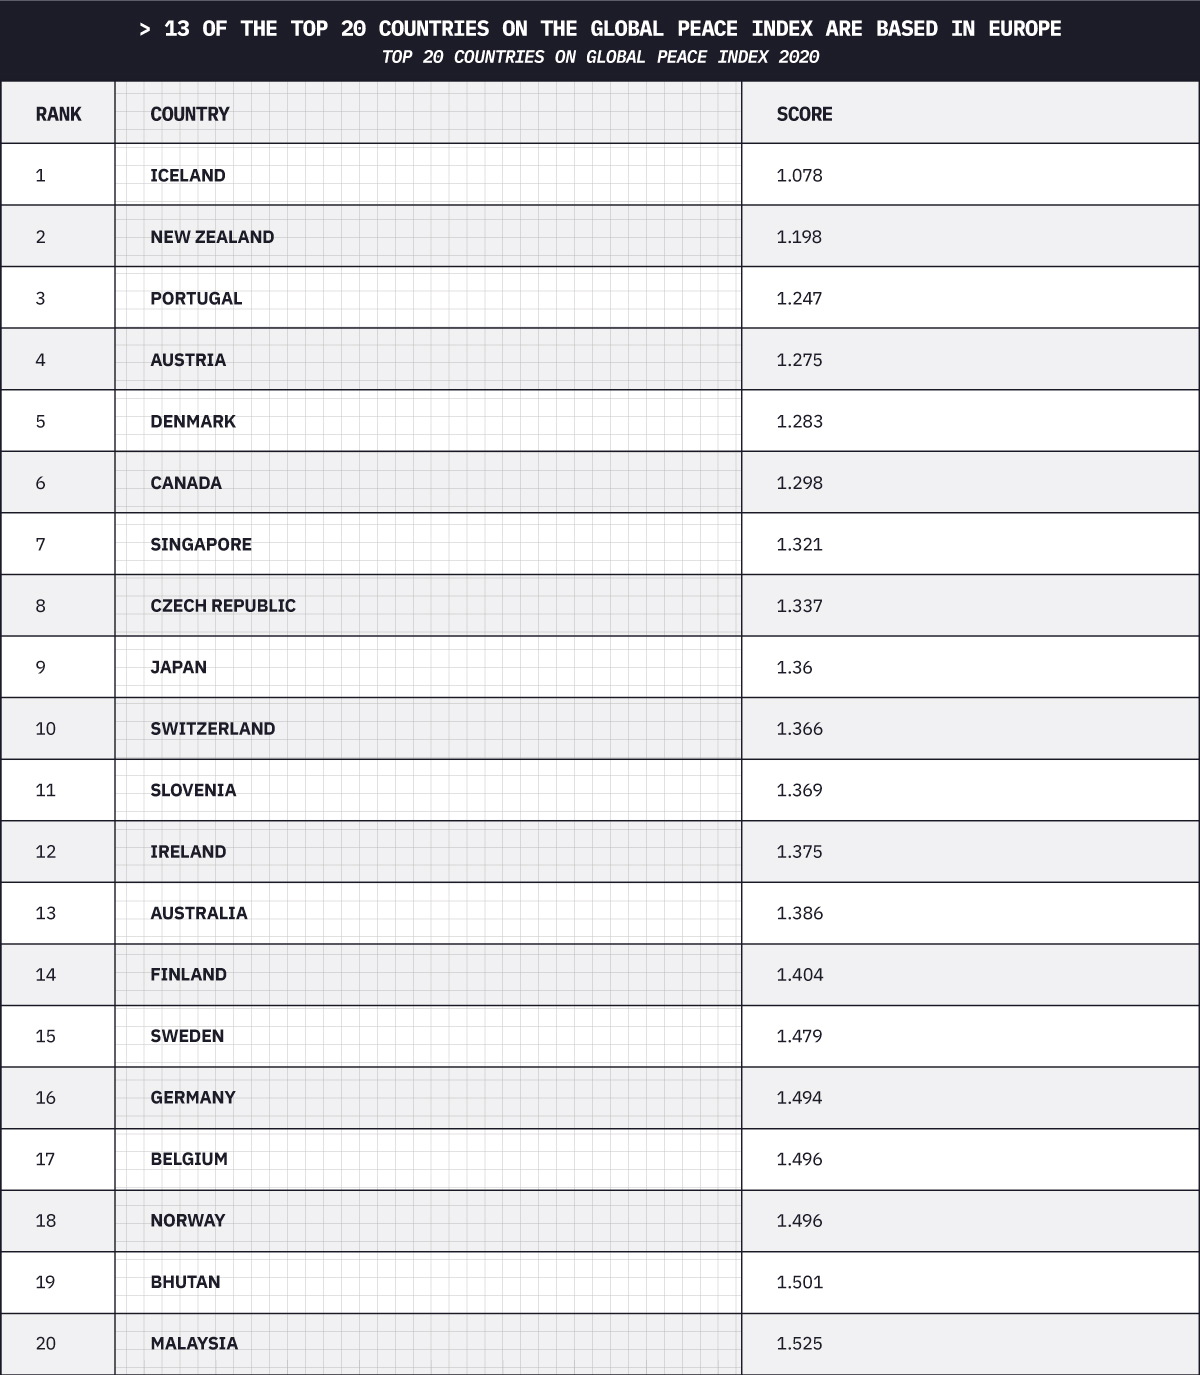 13 of top 20 countries on global safety index are in Europe